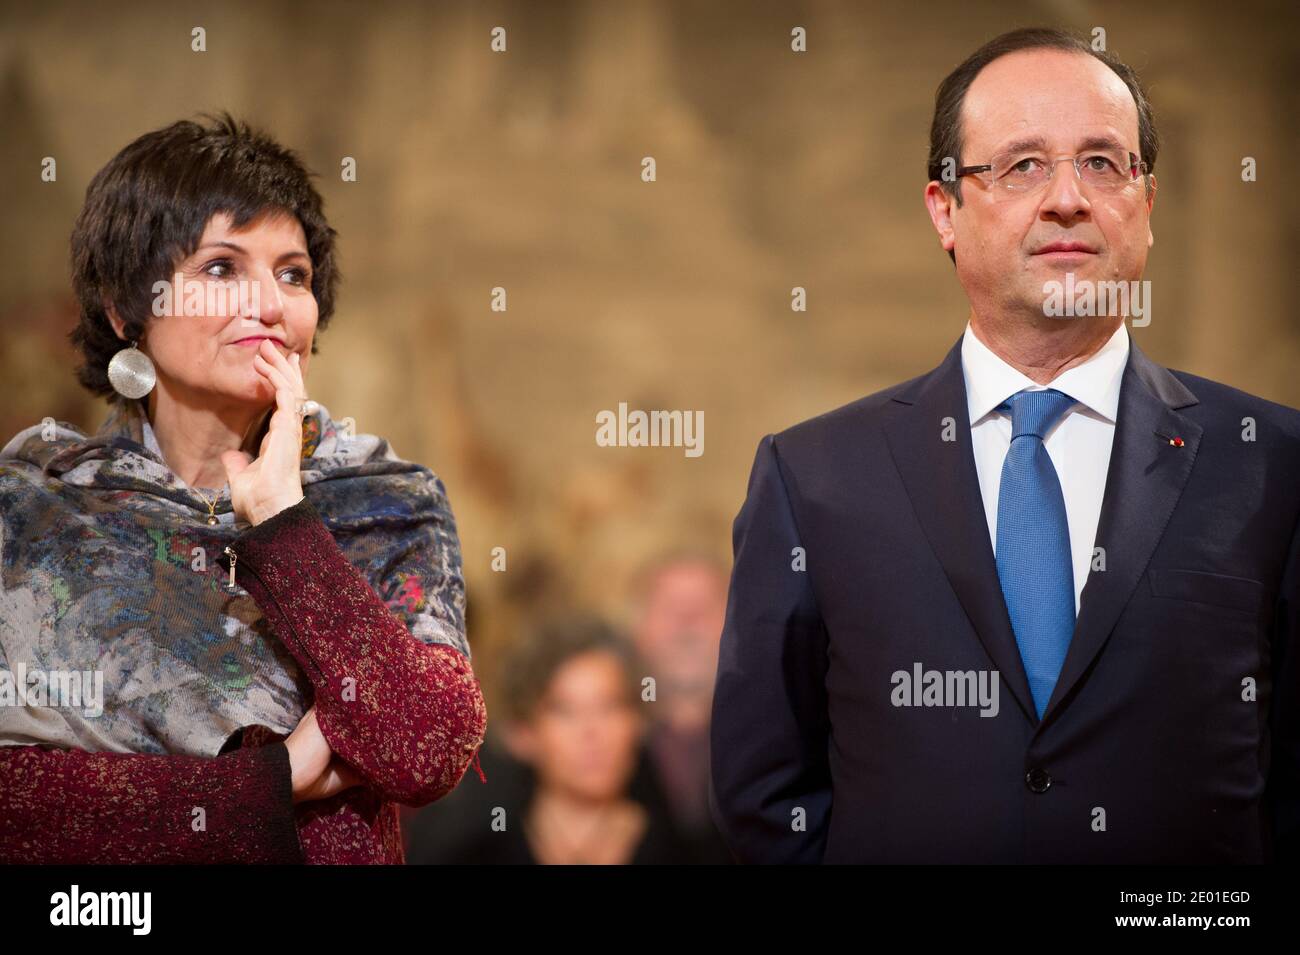 French President Francois Hollande delivers his speech watched by Junior Minister for the Disabled Marie-Arlette Carlotti during the annual awarding ceremony of La Medaille de la Famille Francaise (Medal of the French Family), at the Elysee Palace in Paris, France on November 30, 2013. The award is to honour those who have successfully raised several children with dignity. Photo by Nicolas Gouhier/ABACAPRESS.COM Stock Photo